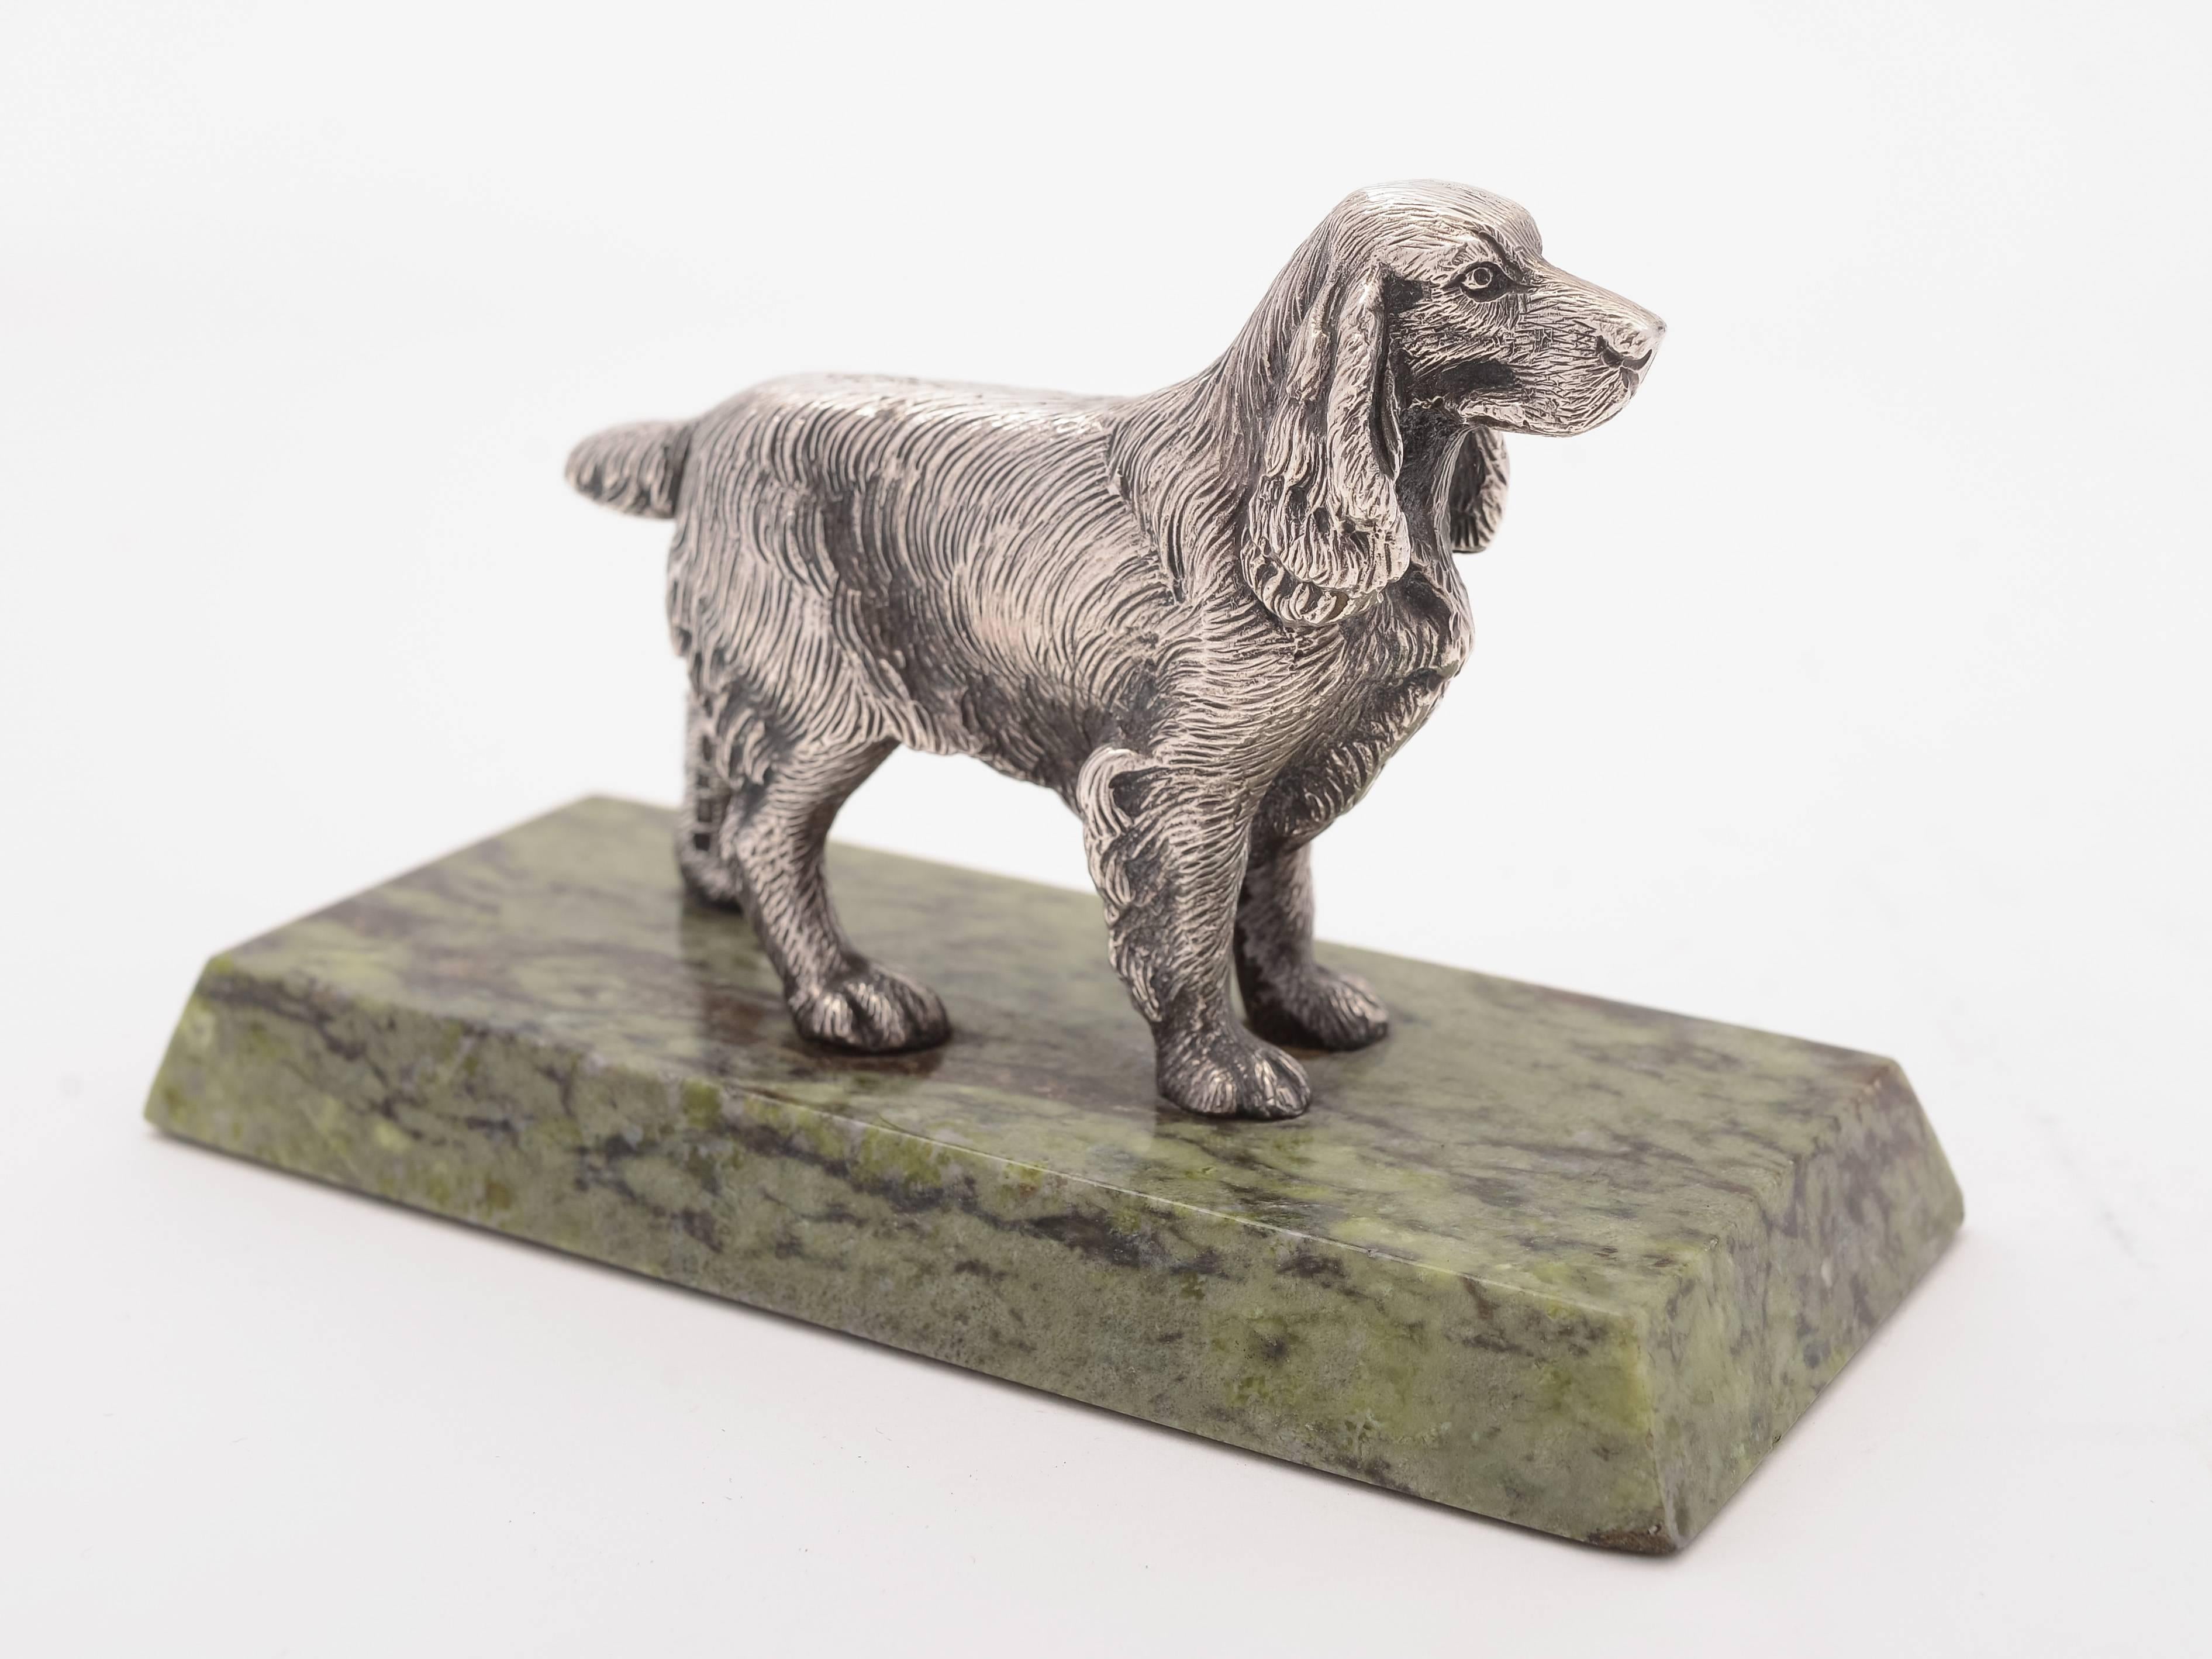 A fabulous English silver figure of spaniel on green marble base (nicely modelled), made by the renowned maker 'Albert E Jones' and hallmarked Birmingham 1985.

Free worldwide delivery. 

Measurements:
Height: 3 1/2